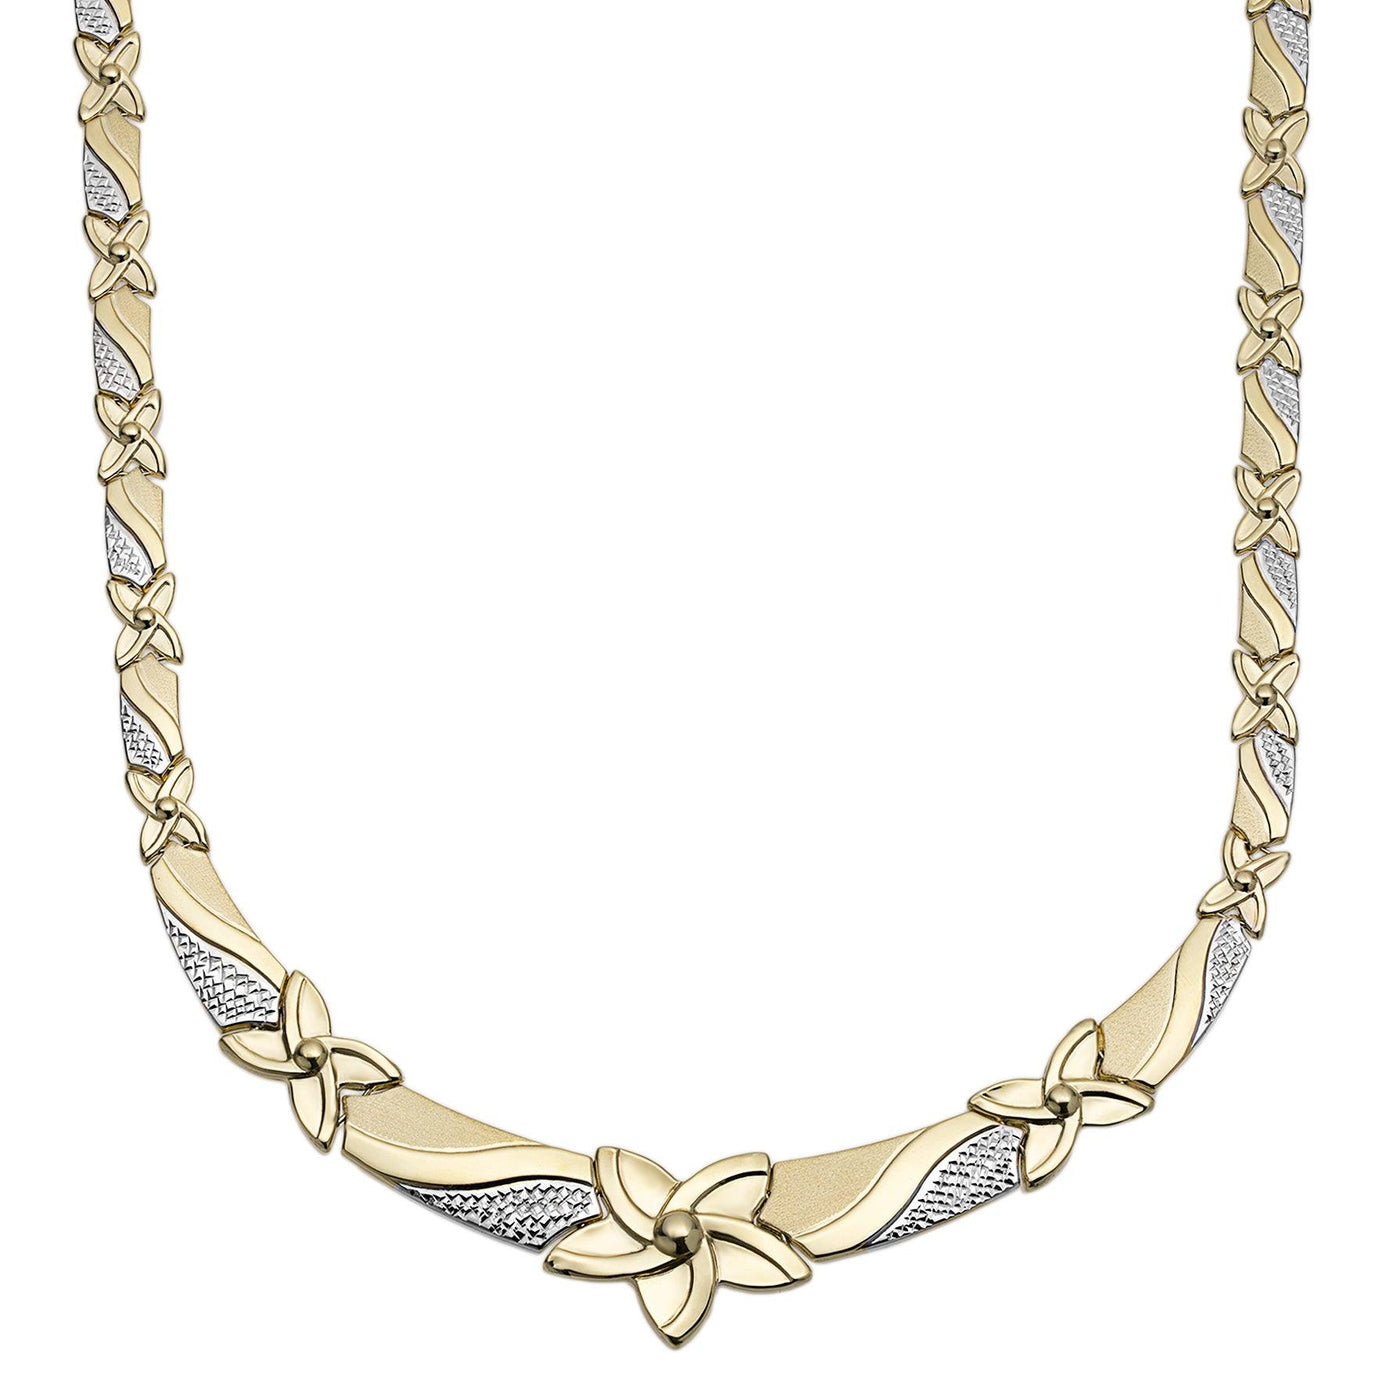 graduated hugs and kisses flower stampato necklace 10k yellow white gold bayamjewelry 1 e4c1878e 6ba2 473e afb7